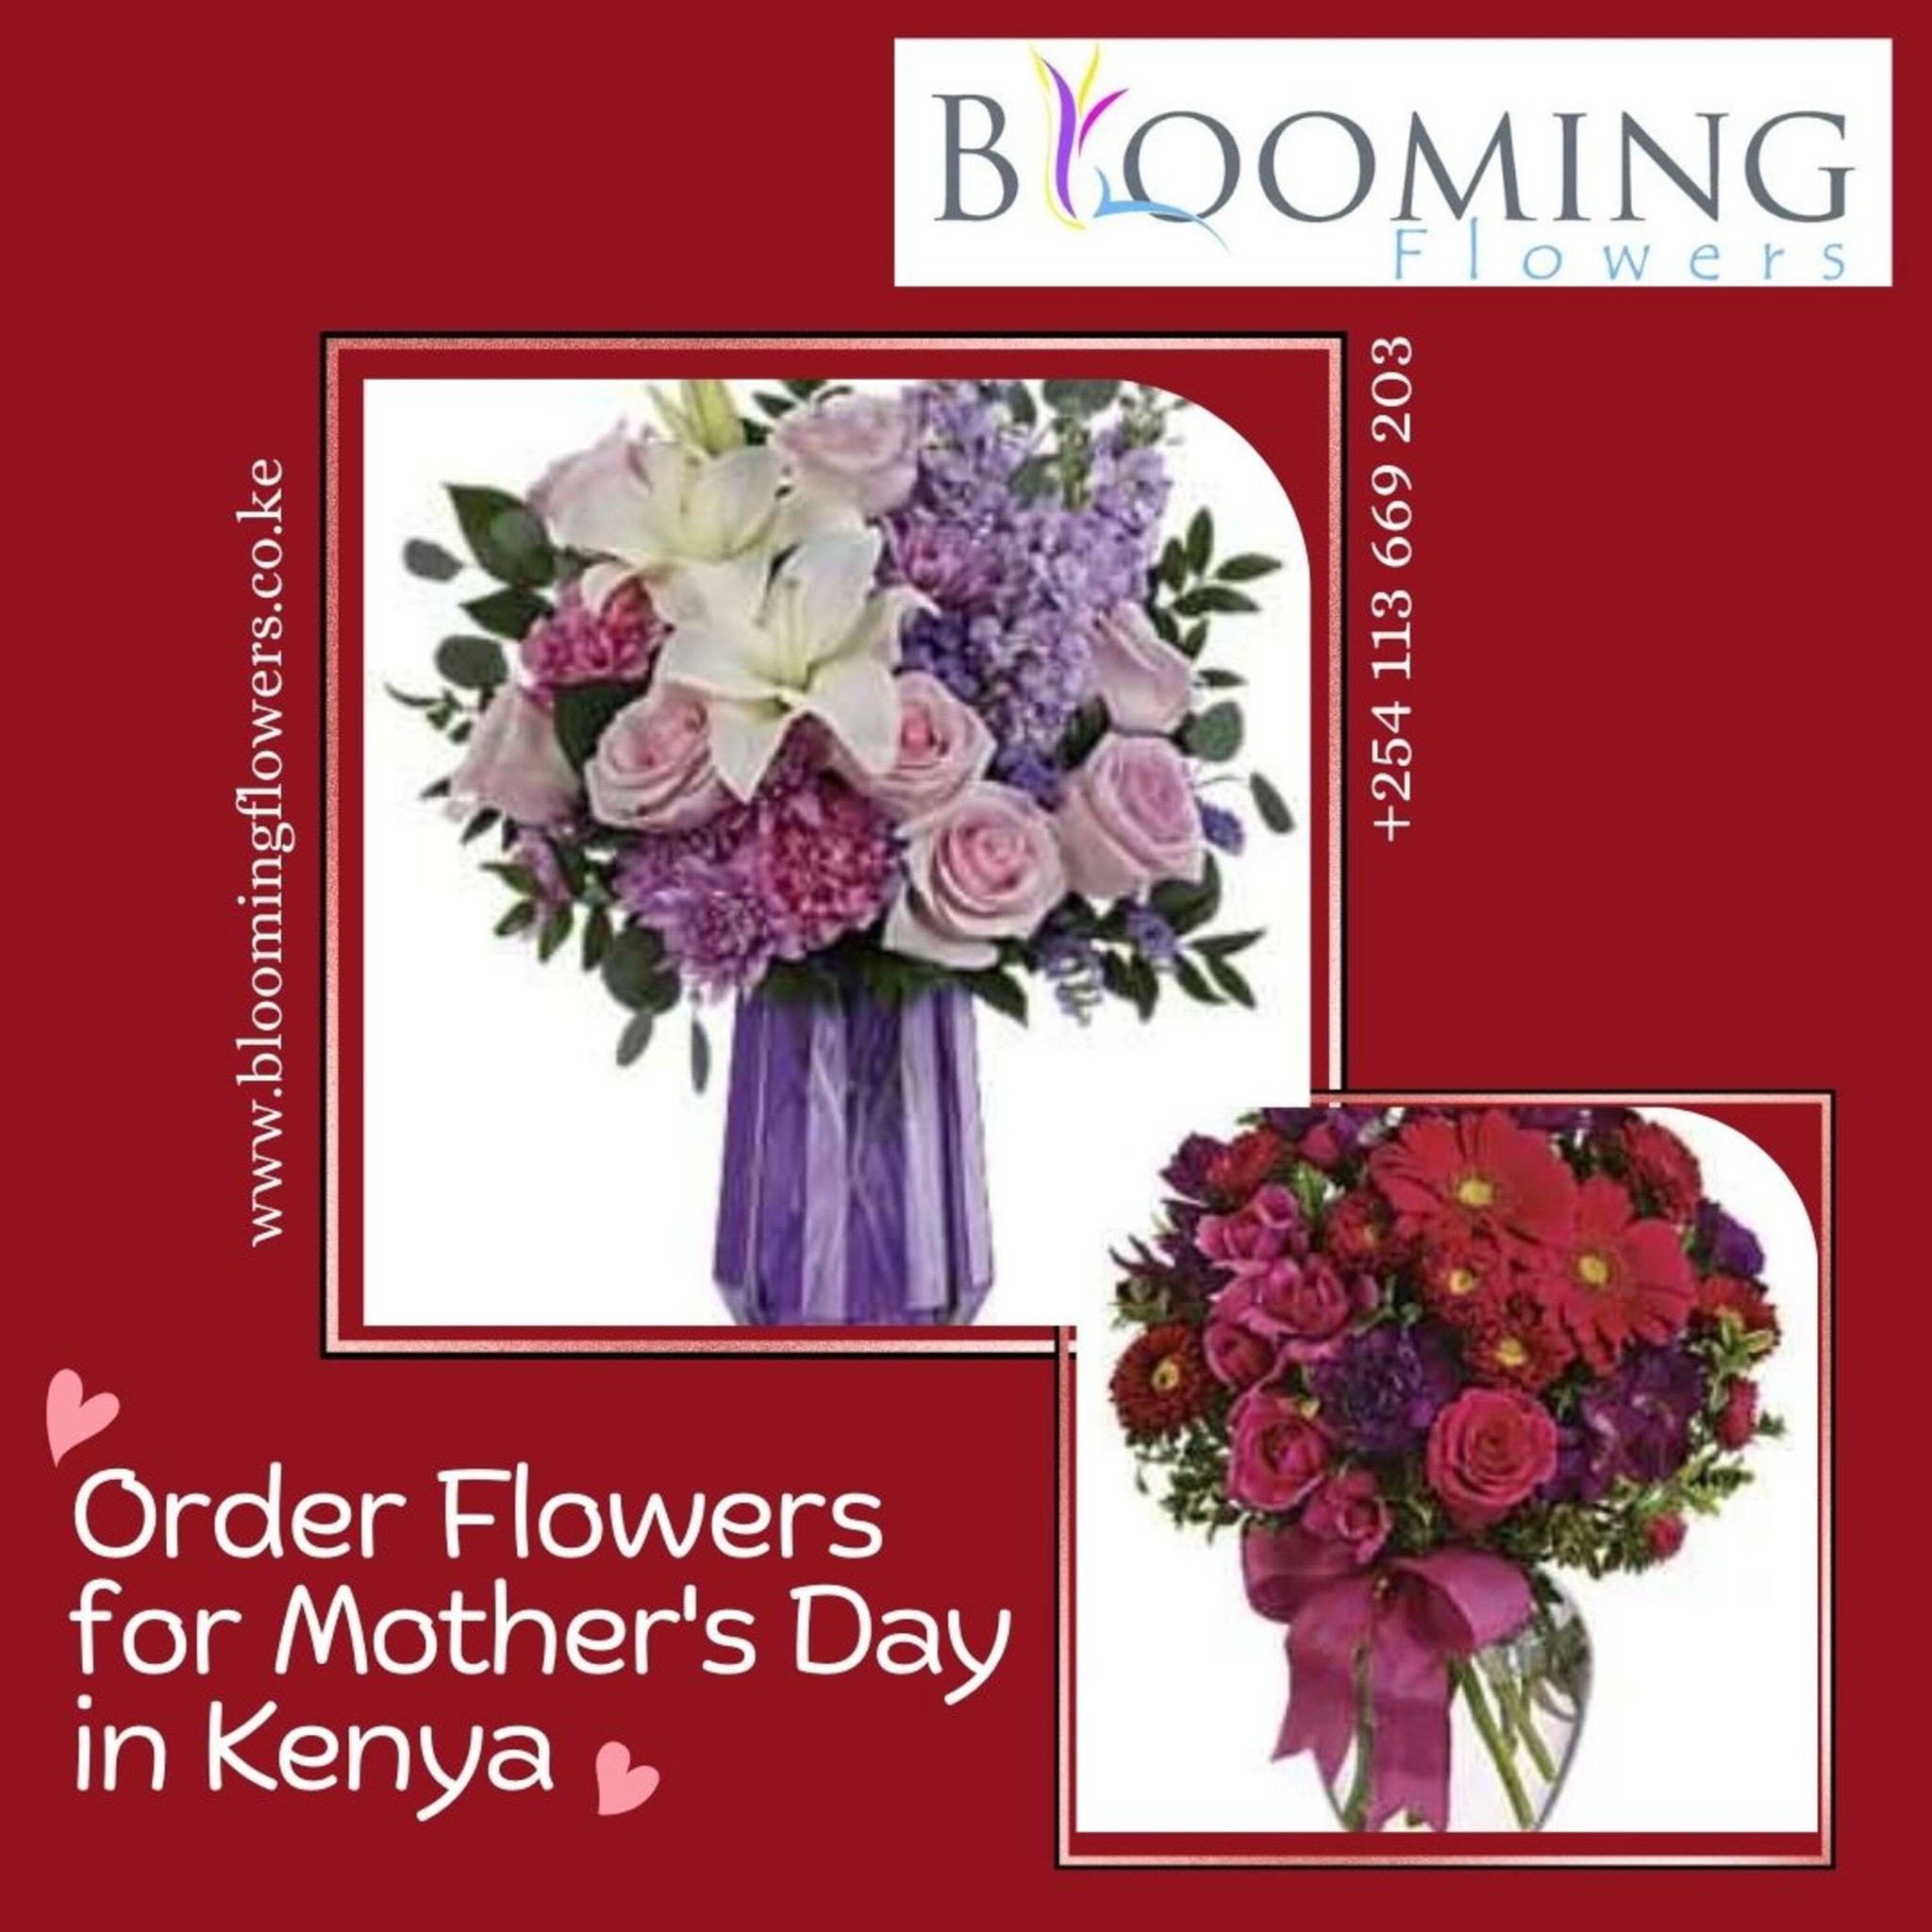 Order Flowers for Mother's Day in Kenya